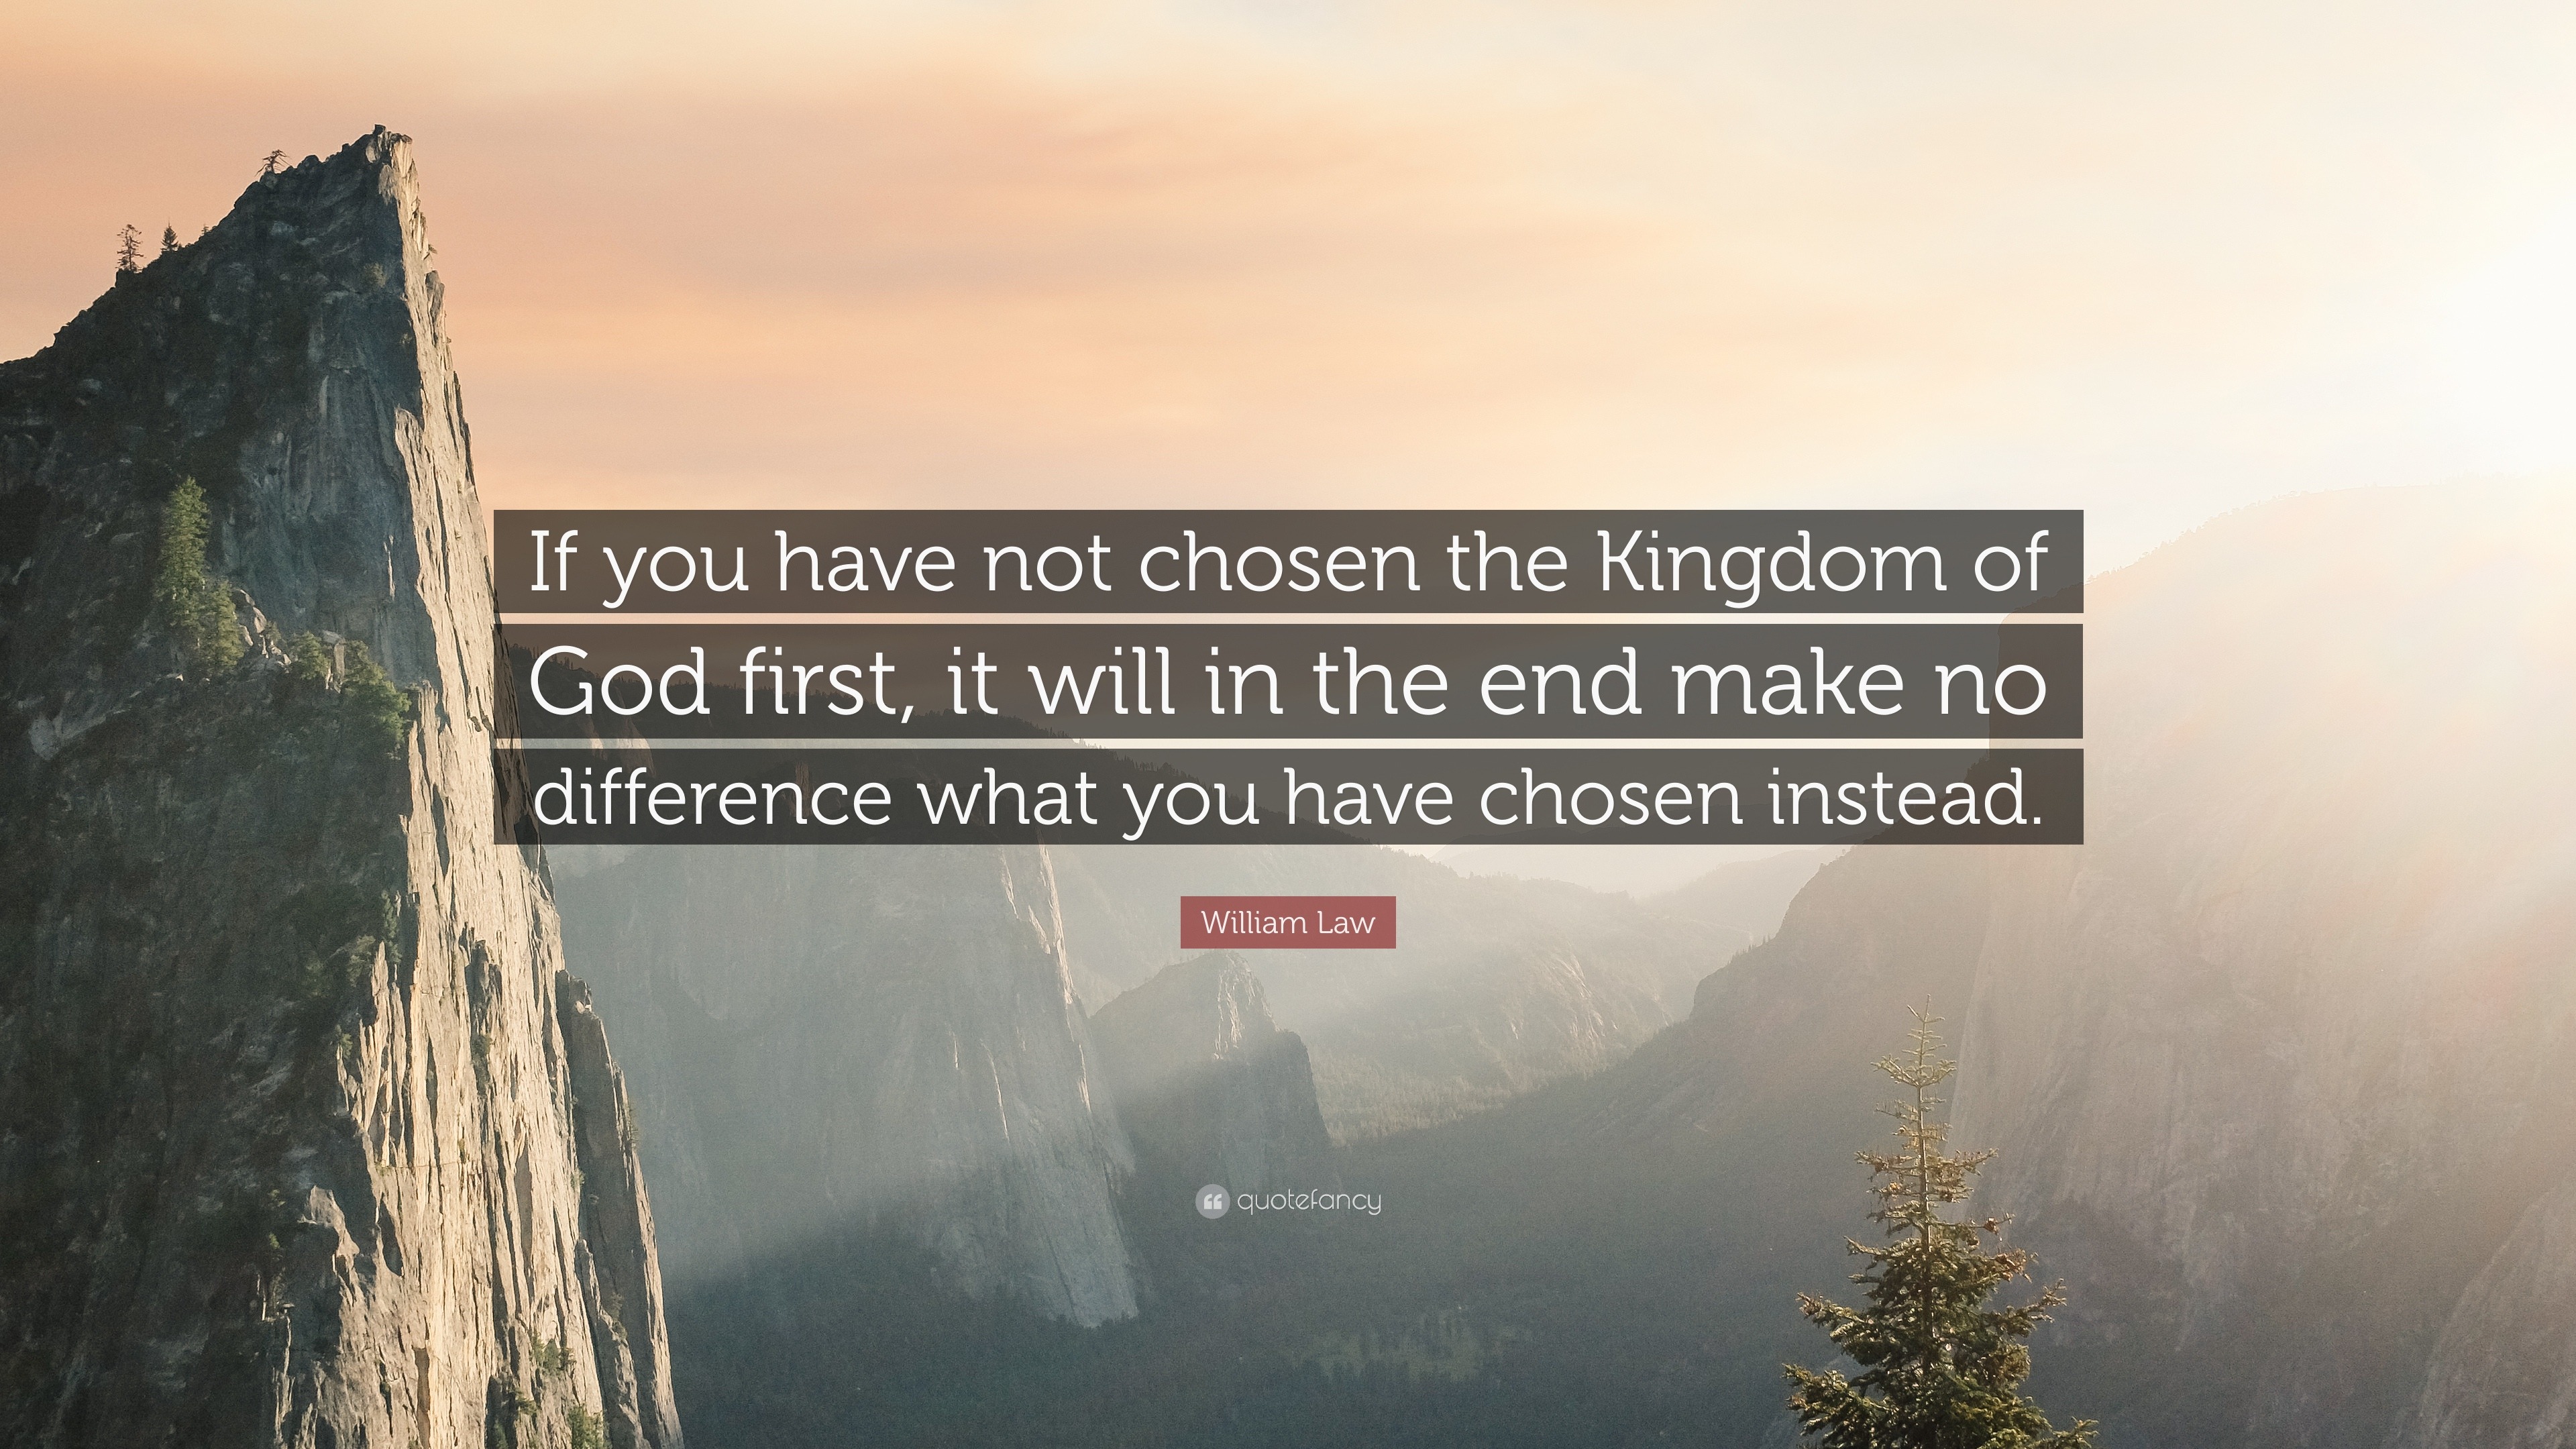 993914-William-Law-Quote-If-you-have-not-chosen-the-Kingdom-of-God-first.jpg